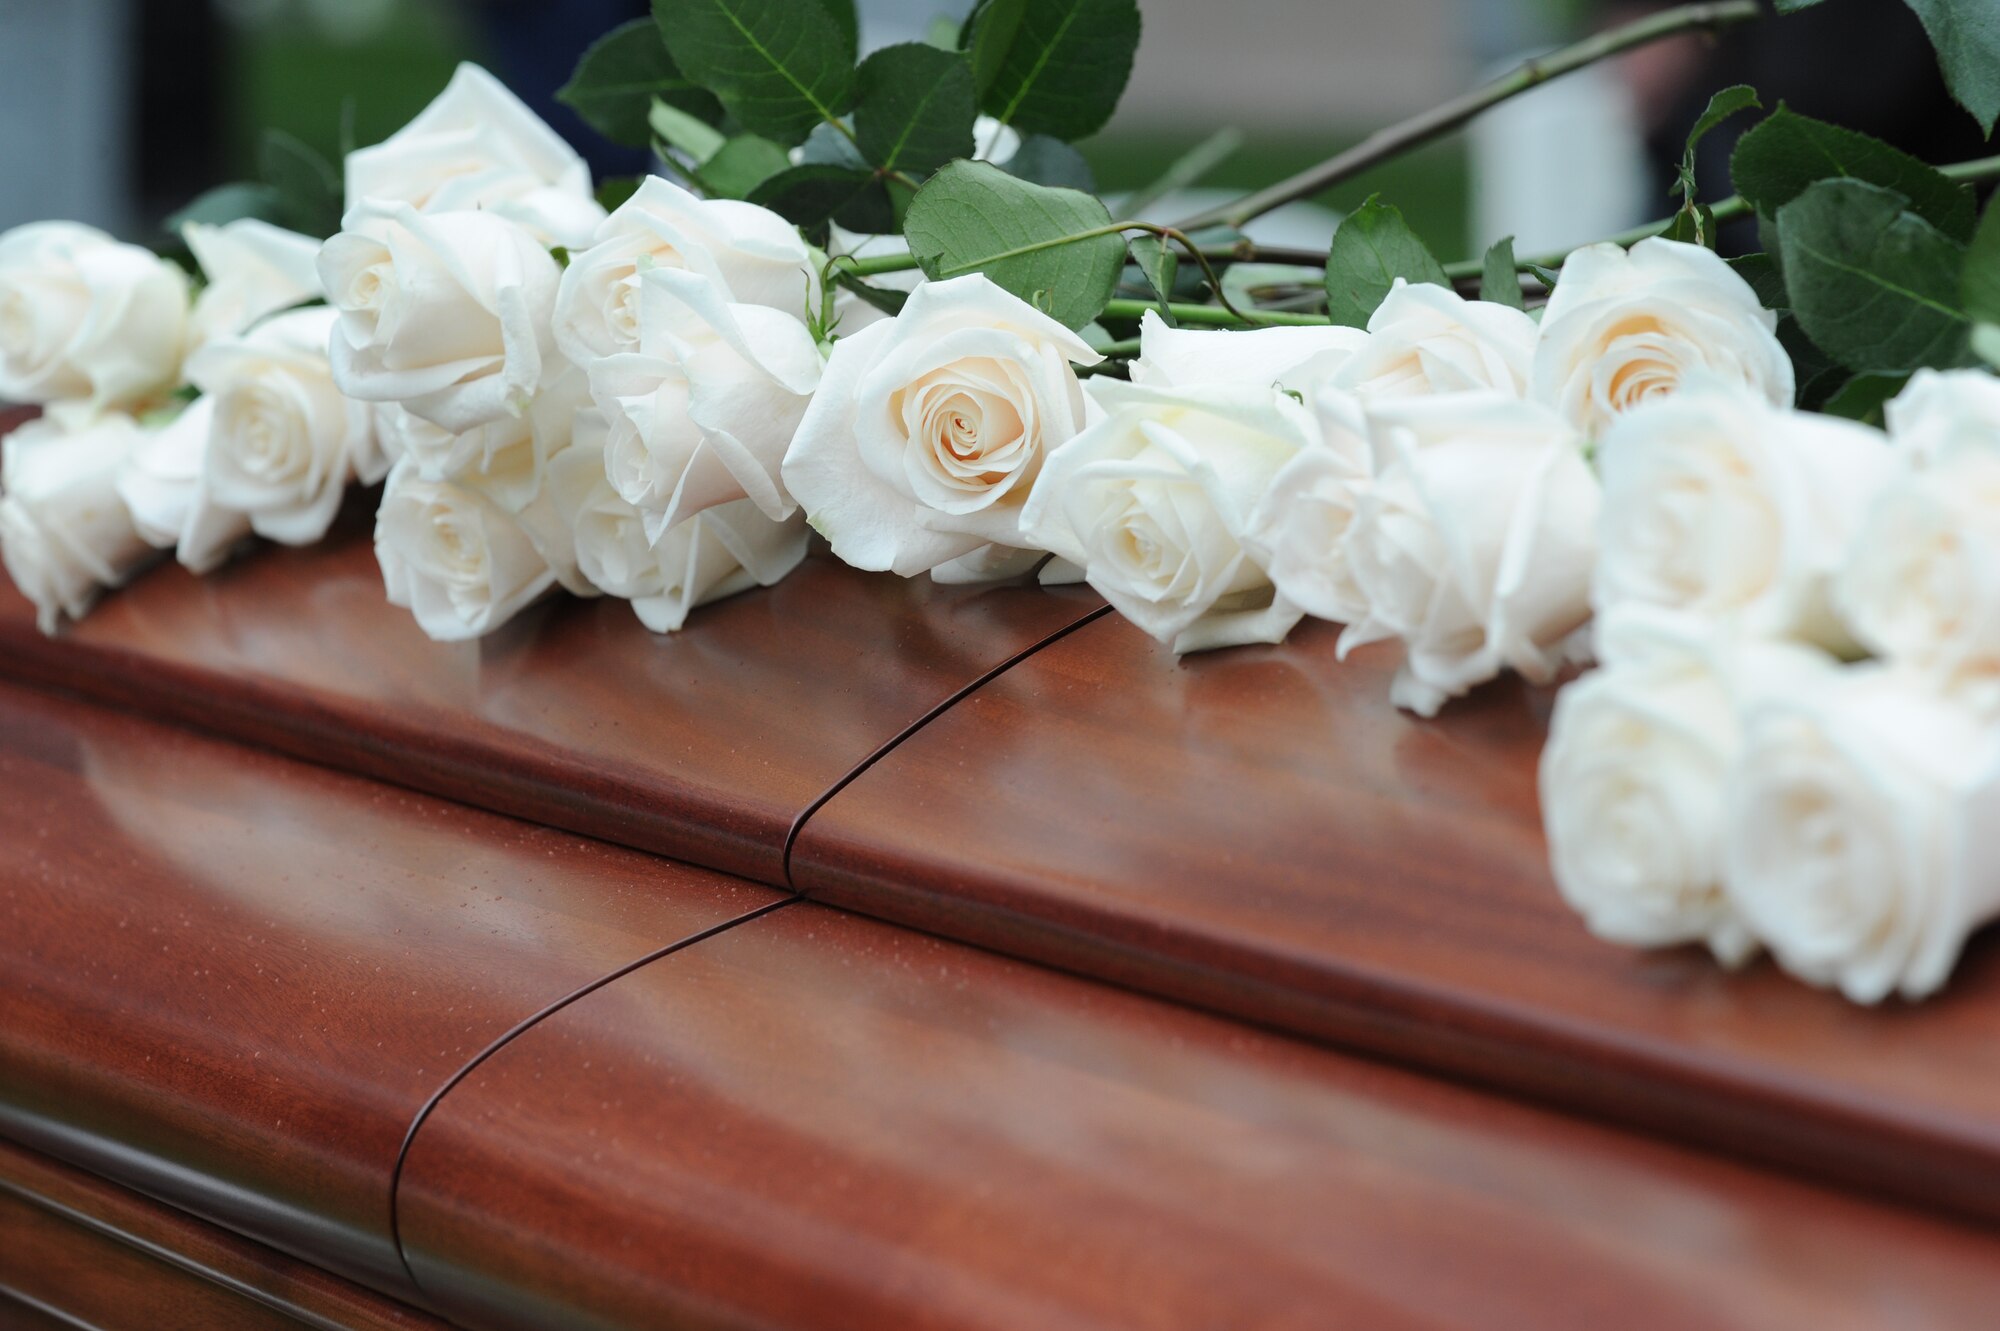 White roses were used to honor retired Maj. Gen. John Alison during his funeral at Arlington National Cemetery, Va., Oct. 3, 2011. Alison served in the Air Force, and its predecessor organizations, from 1935 to 1972. During that time, he became a fighter ace in World War II and held senior staff positions during the Korean and Vietnam wars. (U.S. Air Force photo/Staff Sgt. Christopher Ruano)